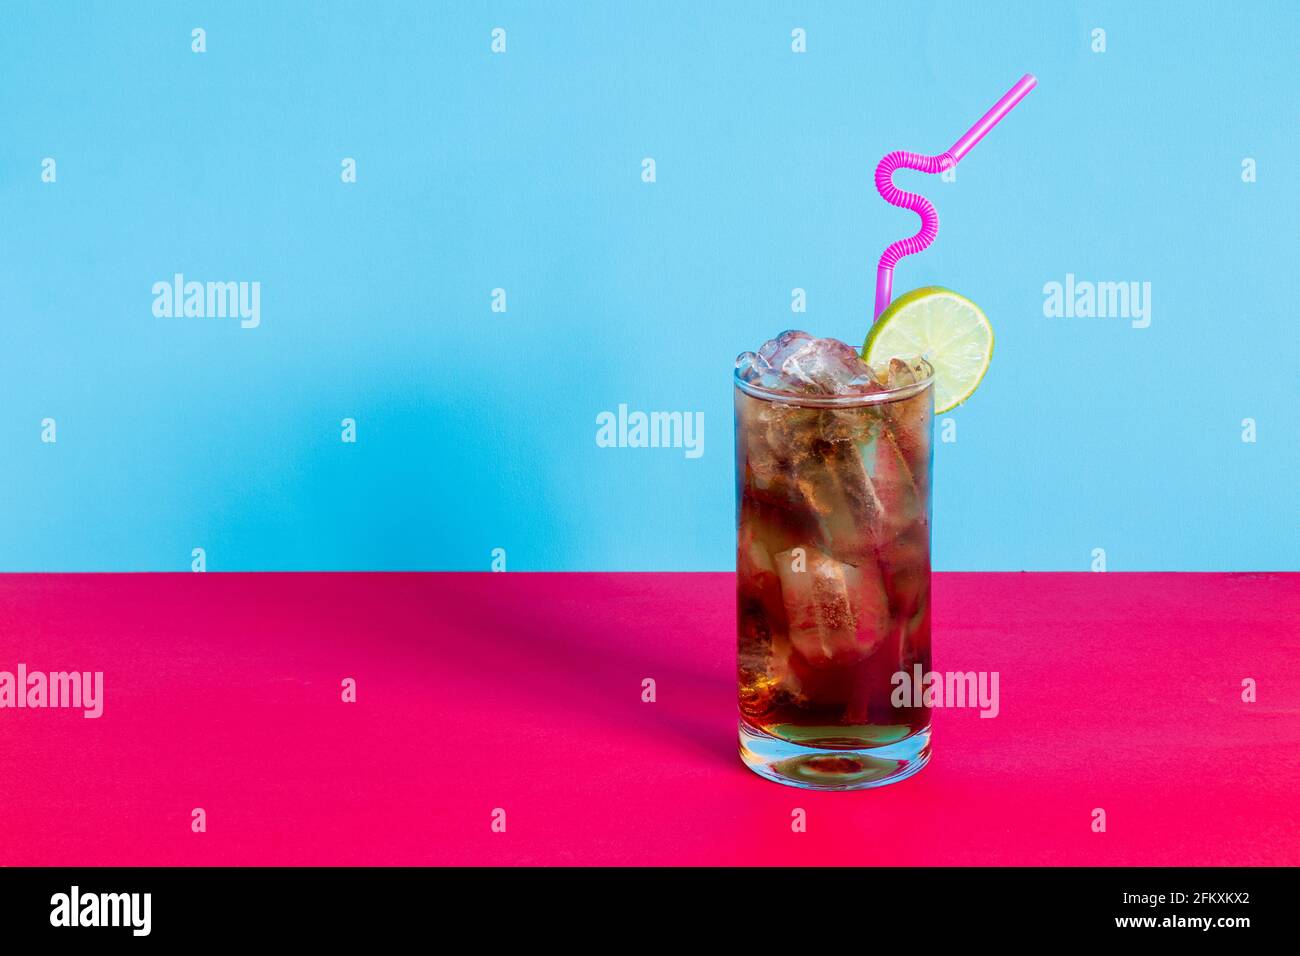 https://c8.alamy.com/comp/2FKXKX2/cocktail-long-island-iced-tea-for-spring-and-summer-drink-concept-2FKXKX2.jpg